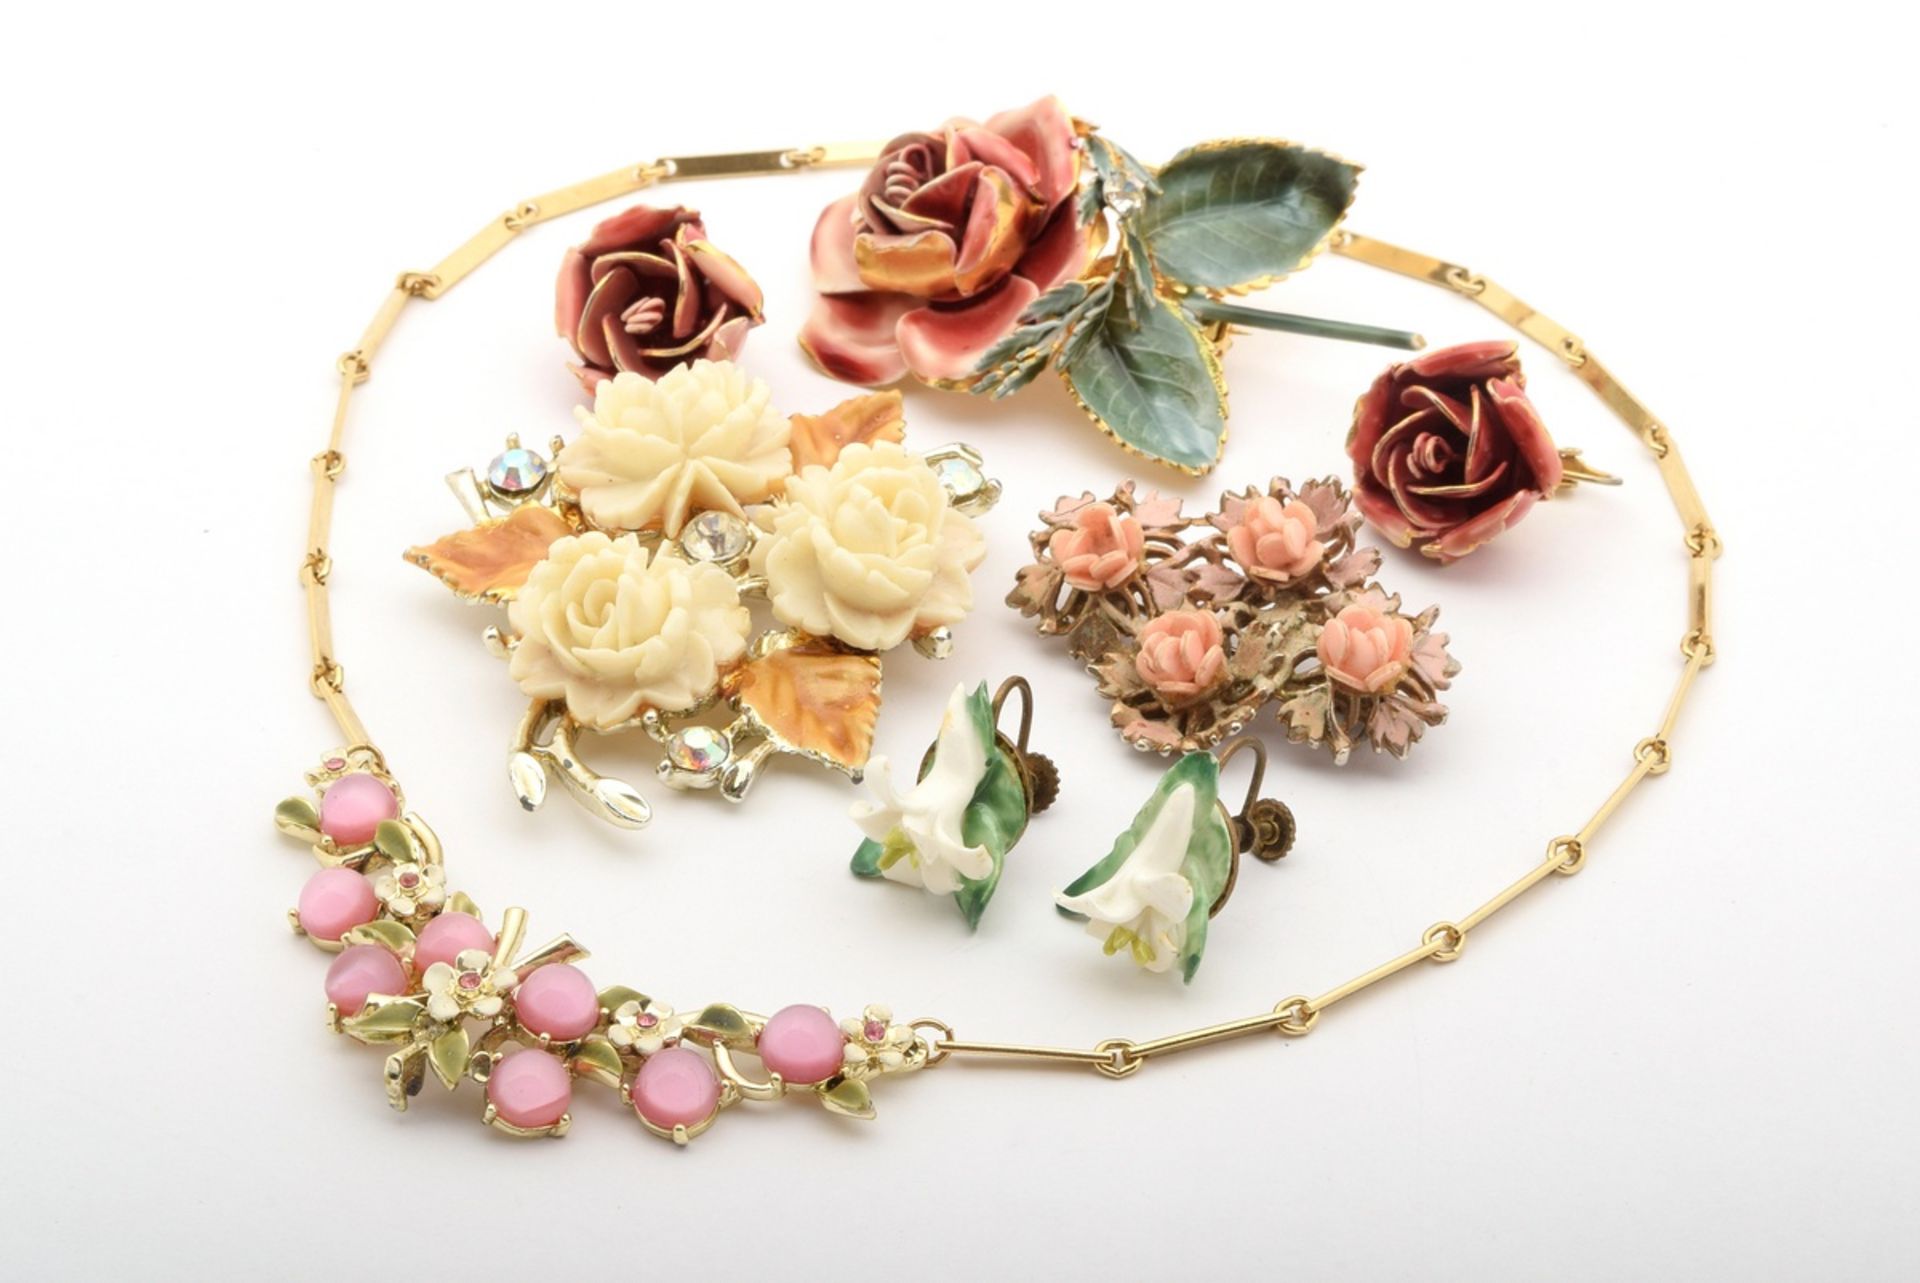 8 pieces of gold plated floral costume jewellery with plastic elements, rhinestones, glass cabochon - Image 2 of 15